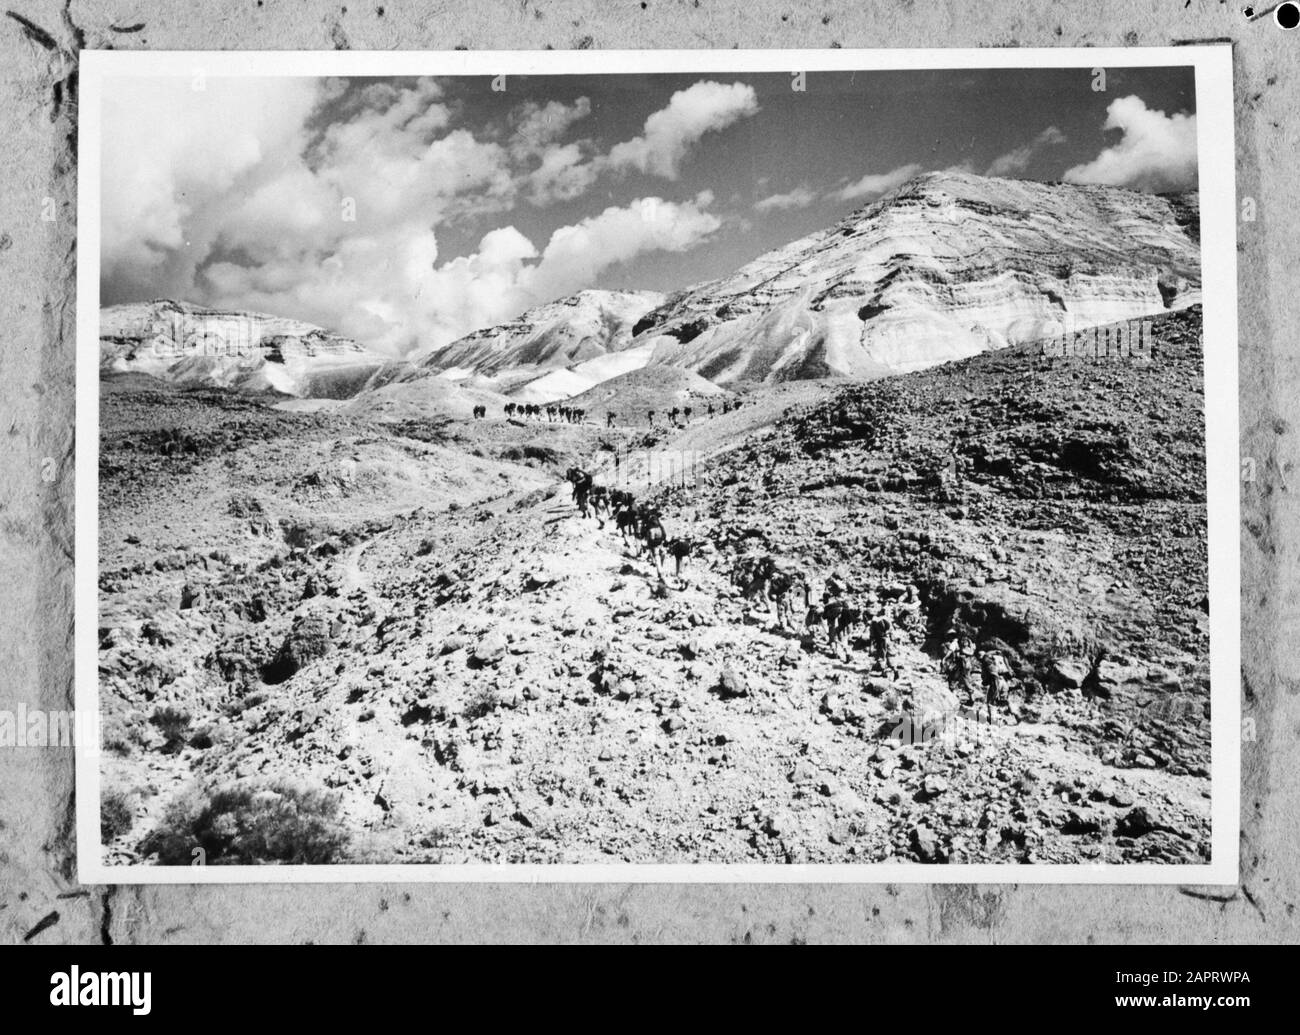 Israel 1964-1965: Dead Sea Area  A group on foot to the high fortress Massada Annotation: Massada is a citadel on a rock near the Dead Sea. It is known for the resistance of refugees against the Roman occupation after 70 AD Date: 1964 Location: Dead Sea, Israel, Massada Keywords: mountains, panoramas, rocks, fortifications Stock Photo